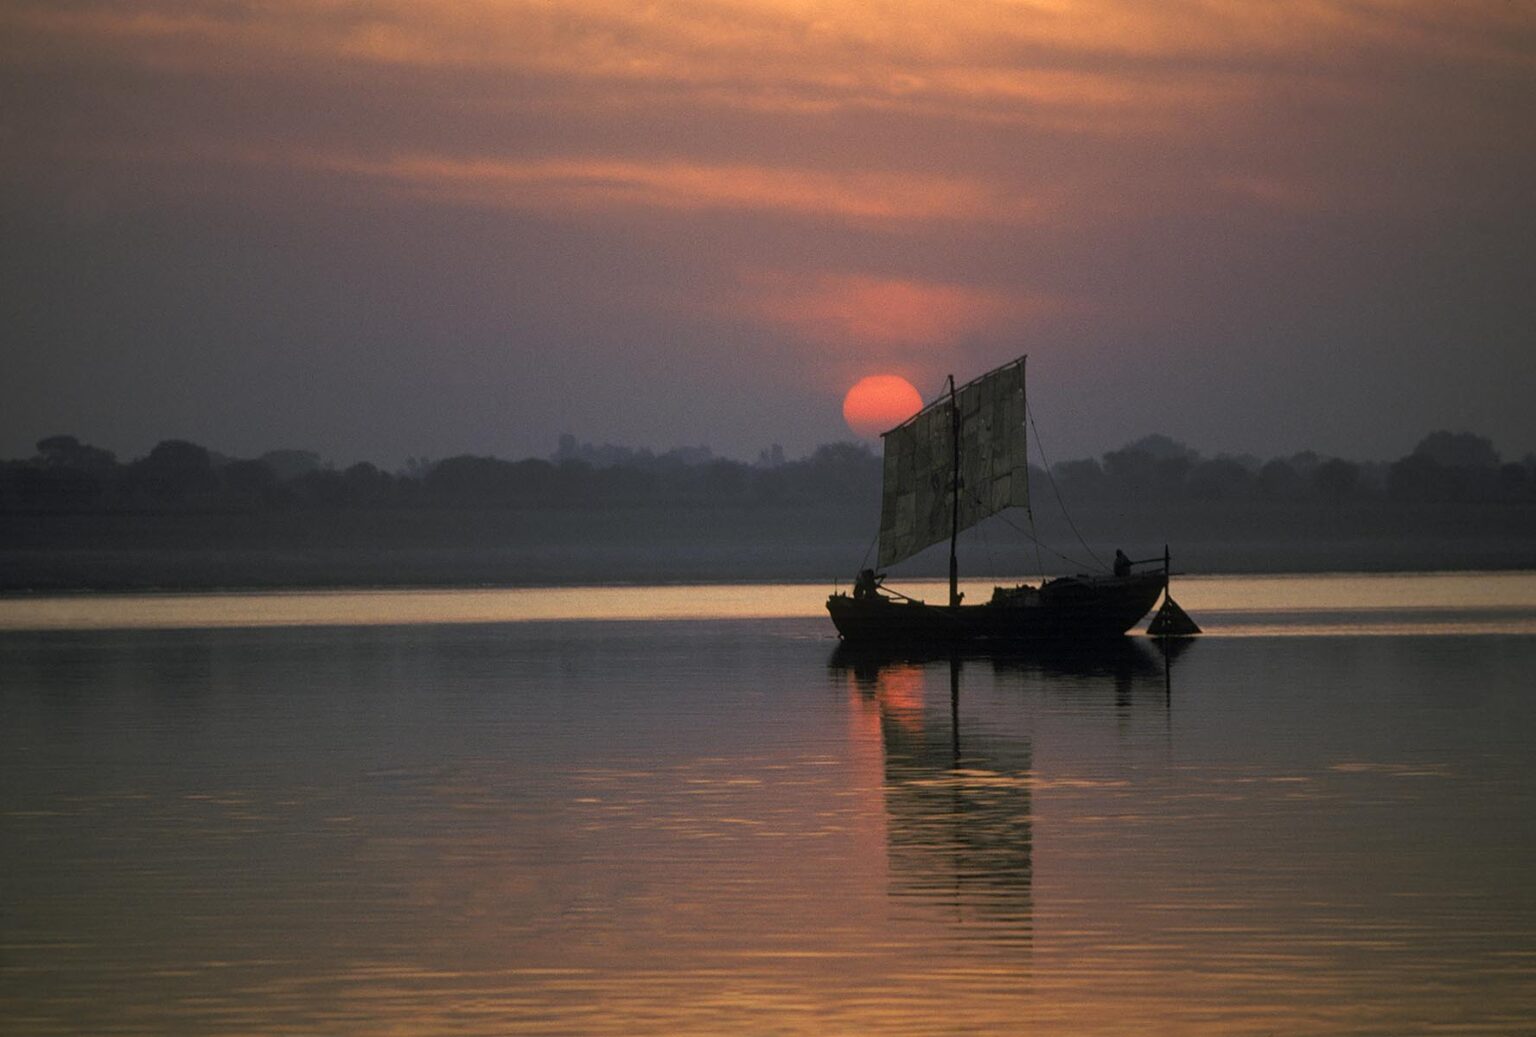 SUNRISE over a small INDIAN fishing boat on the GANGES RIVER - VARANASI (BENARES), INDIA